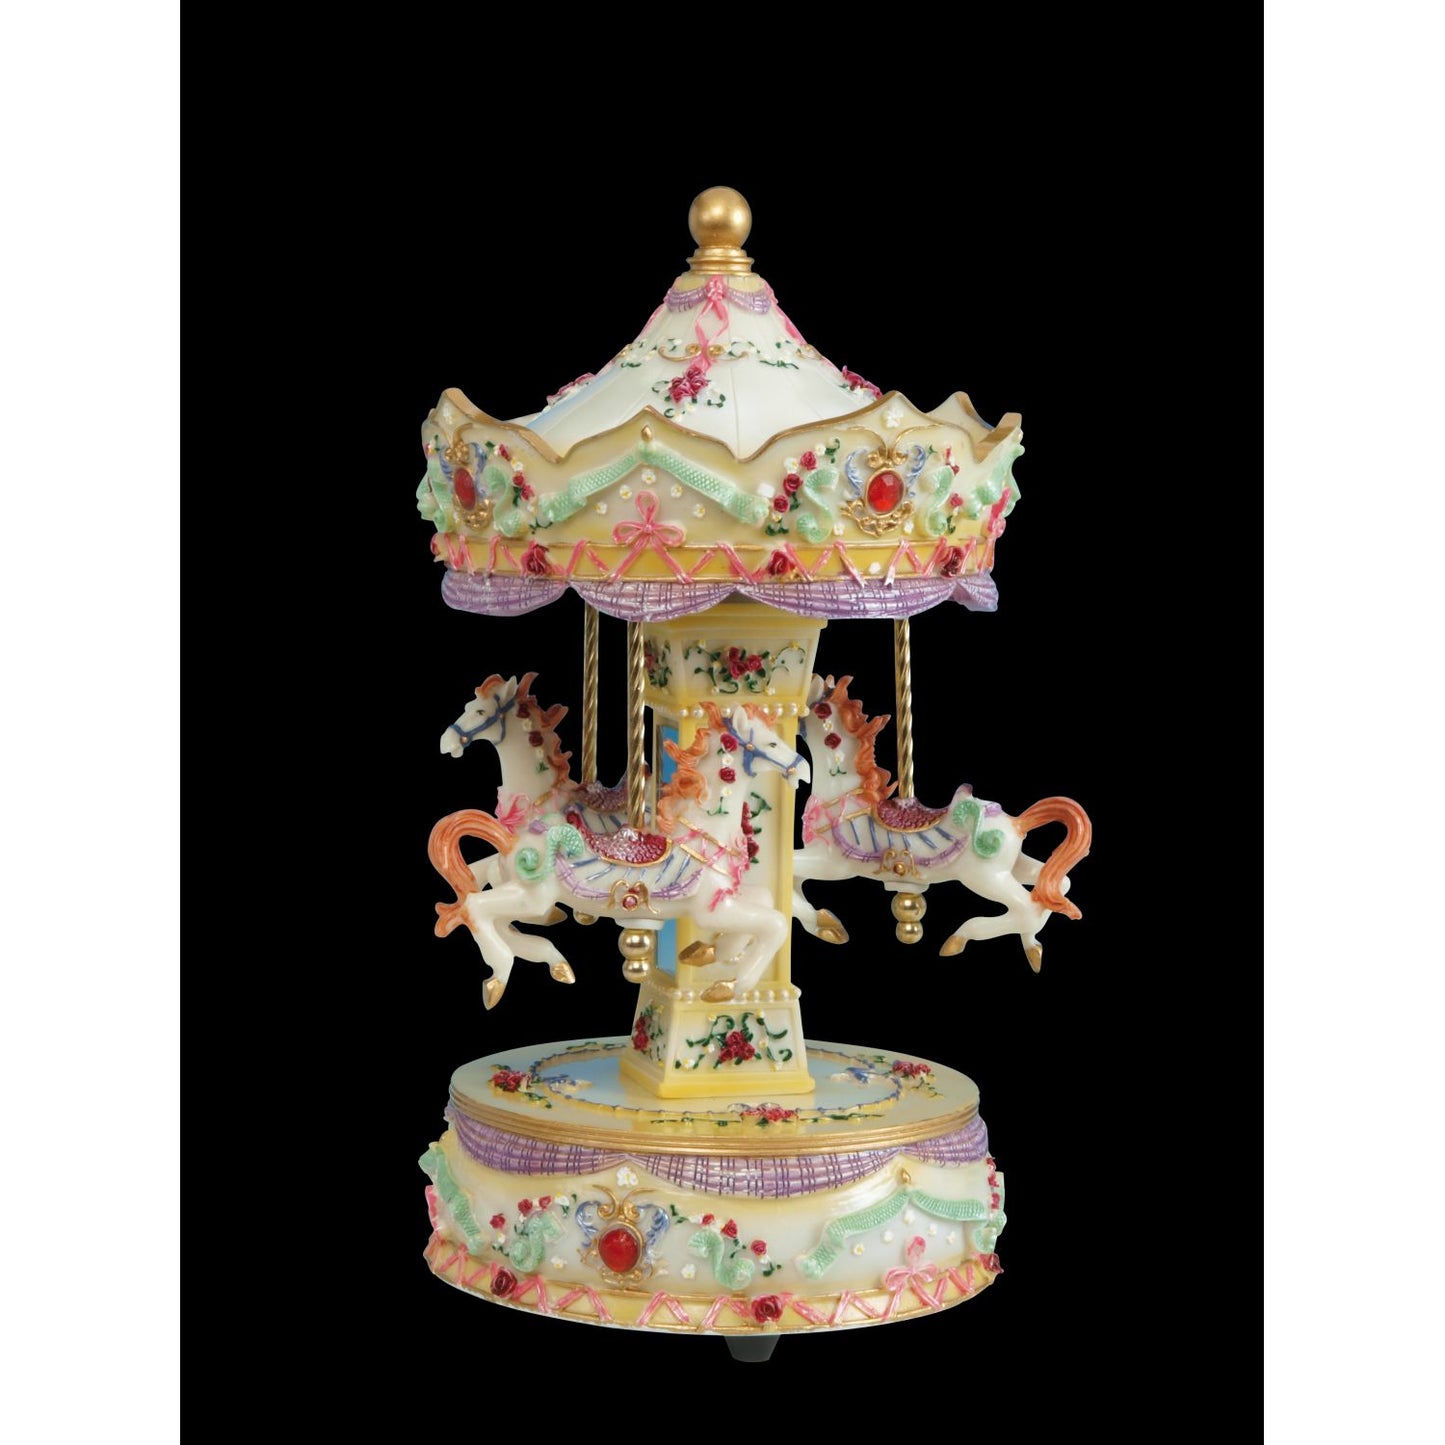 Musicbox Kingdom 9.1" Beige Carousel Turns To The Melody “Blue Danube”